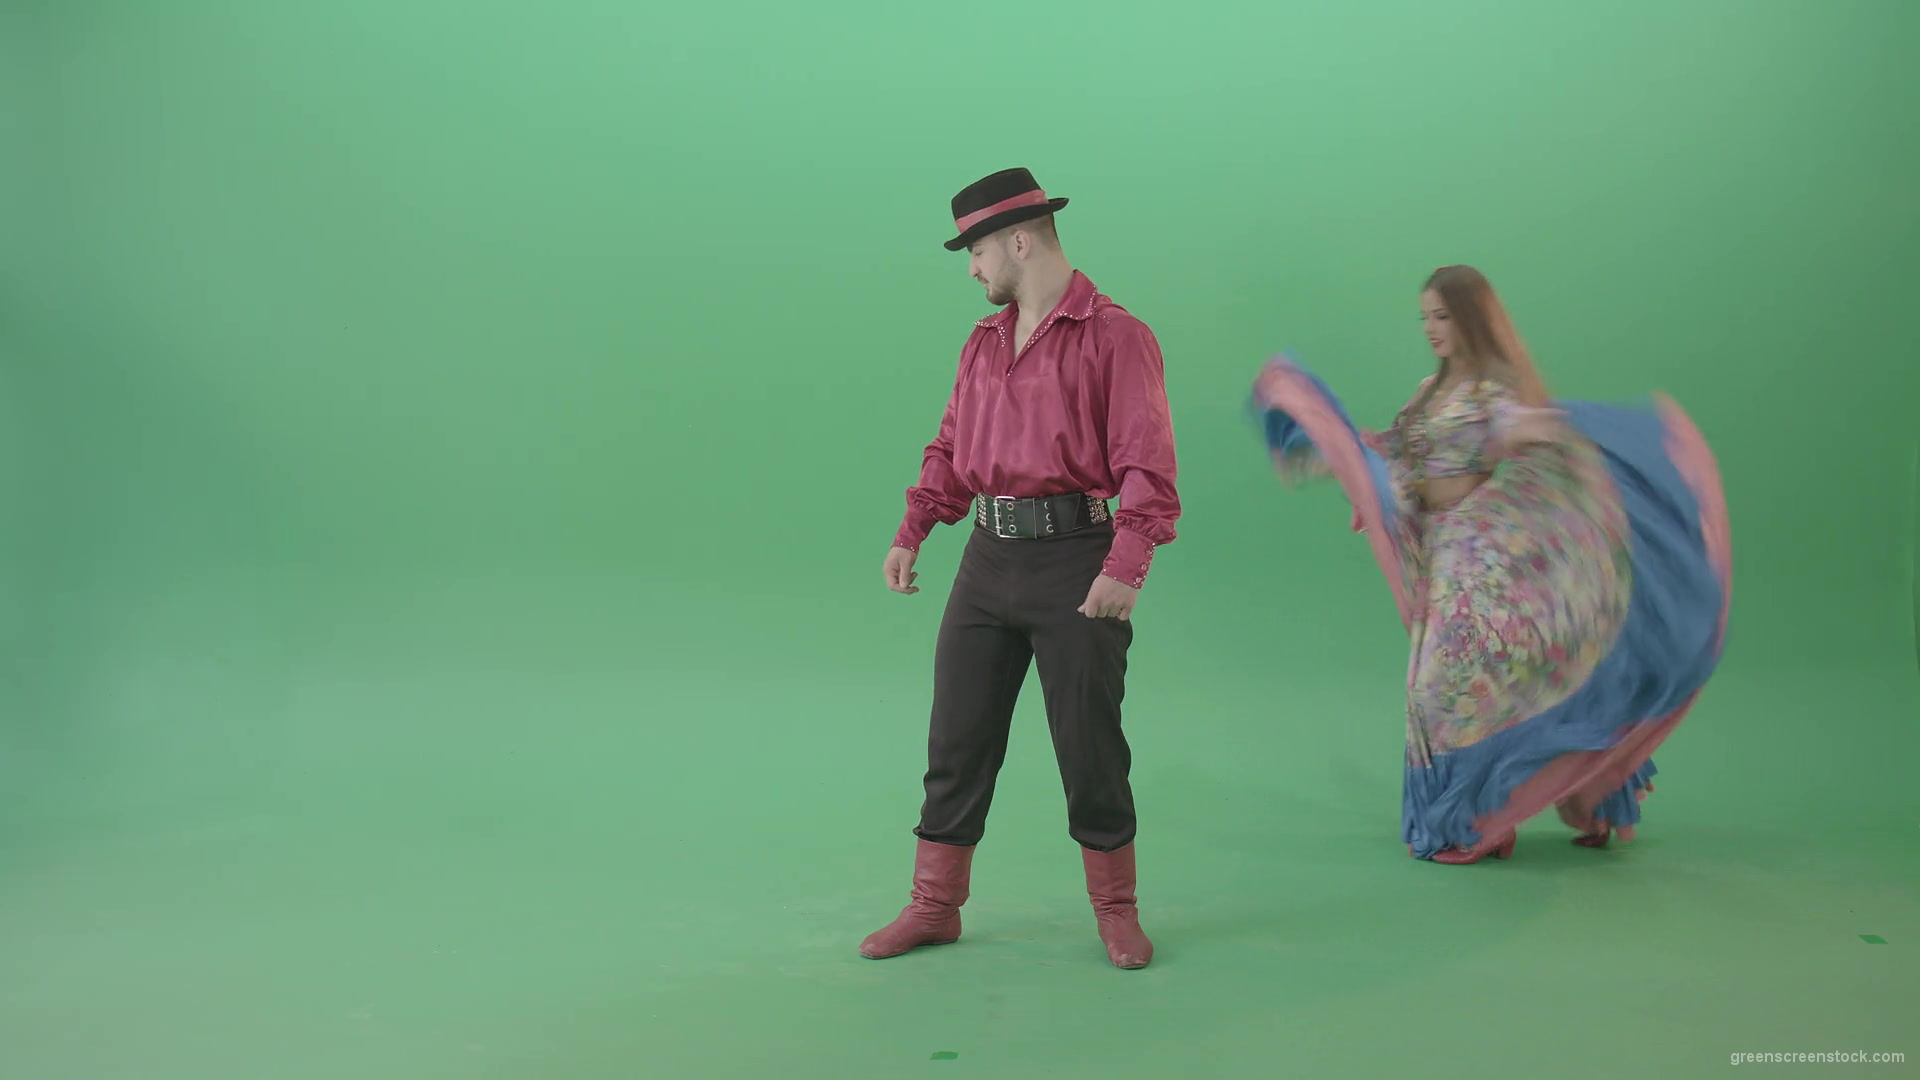 Gypsy-man-and-woman-spinning-dancing-over-green-screen-4K-video-footage-1920_002 Green Screen Stock